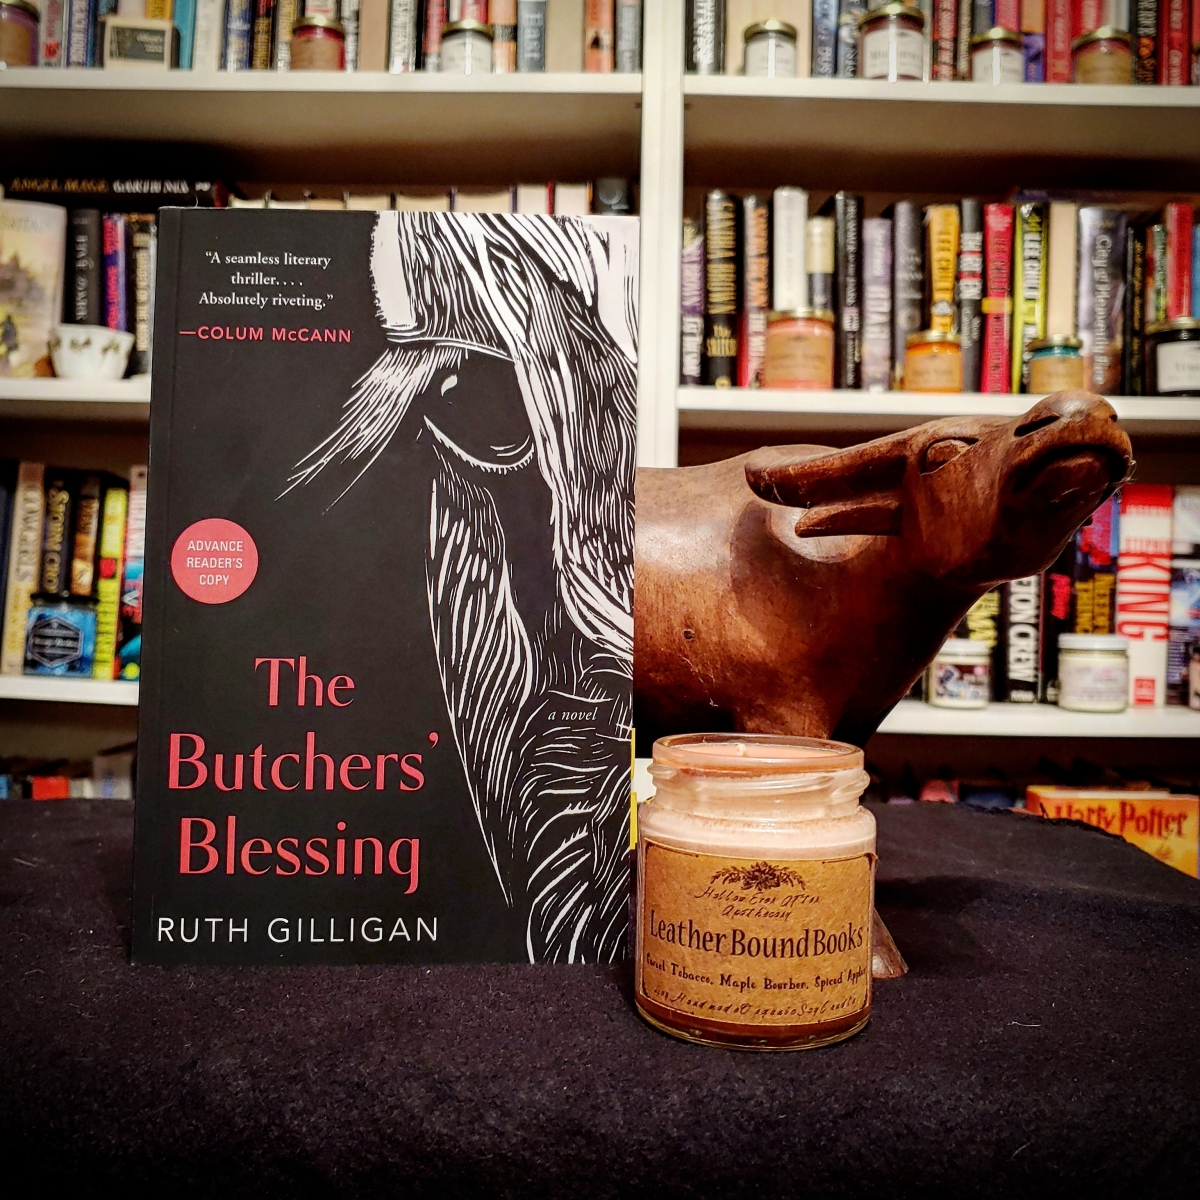 The Butchers' Blessing by Ruth Gilligan , a white lined artistic drawing of half a cow's face on a black background.